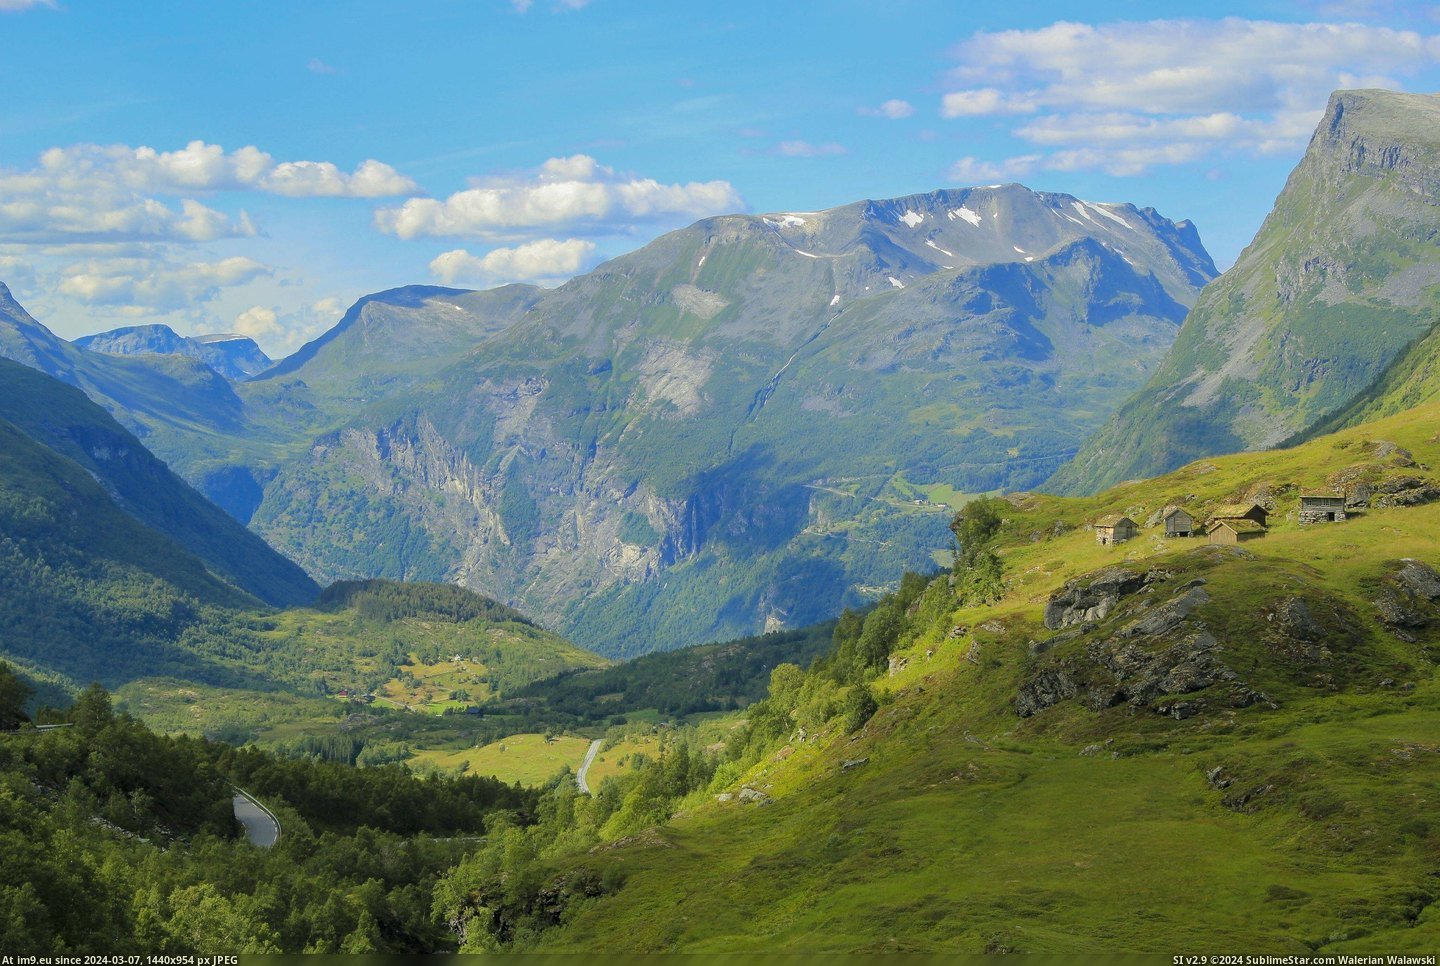 #Photo #Norway #Geiranger #5184x3456 #Roadtrip [Earthporn] A photo i took during my roadtrip in Norway. Geiranger, Norway [5184x3456] Pic. (Изображение из альбом My r/EARTHPORN favs))